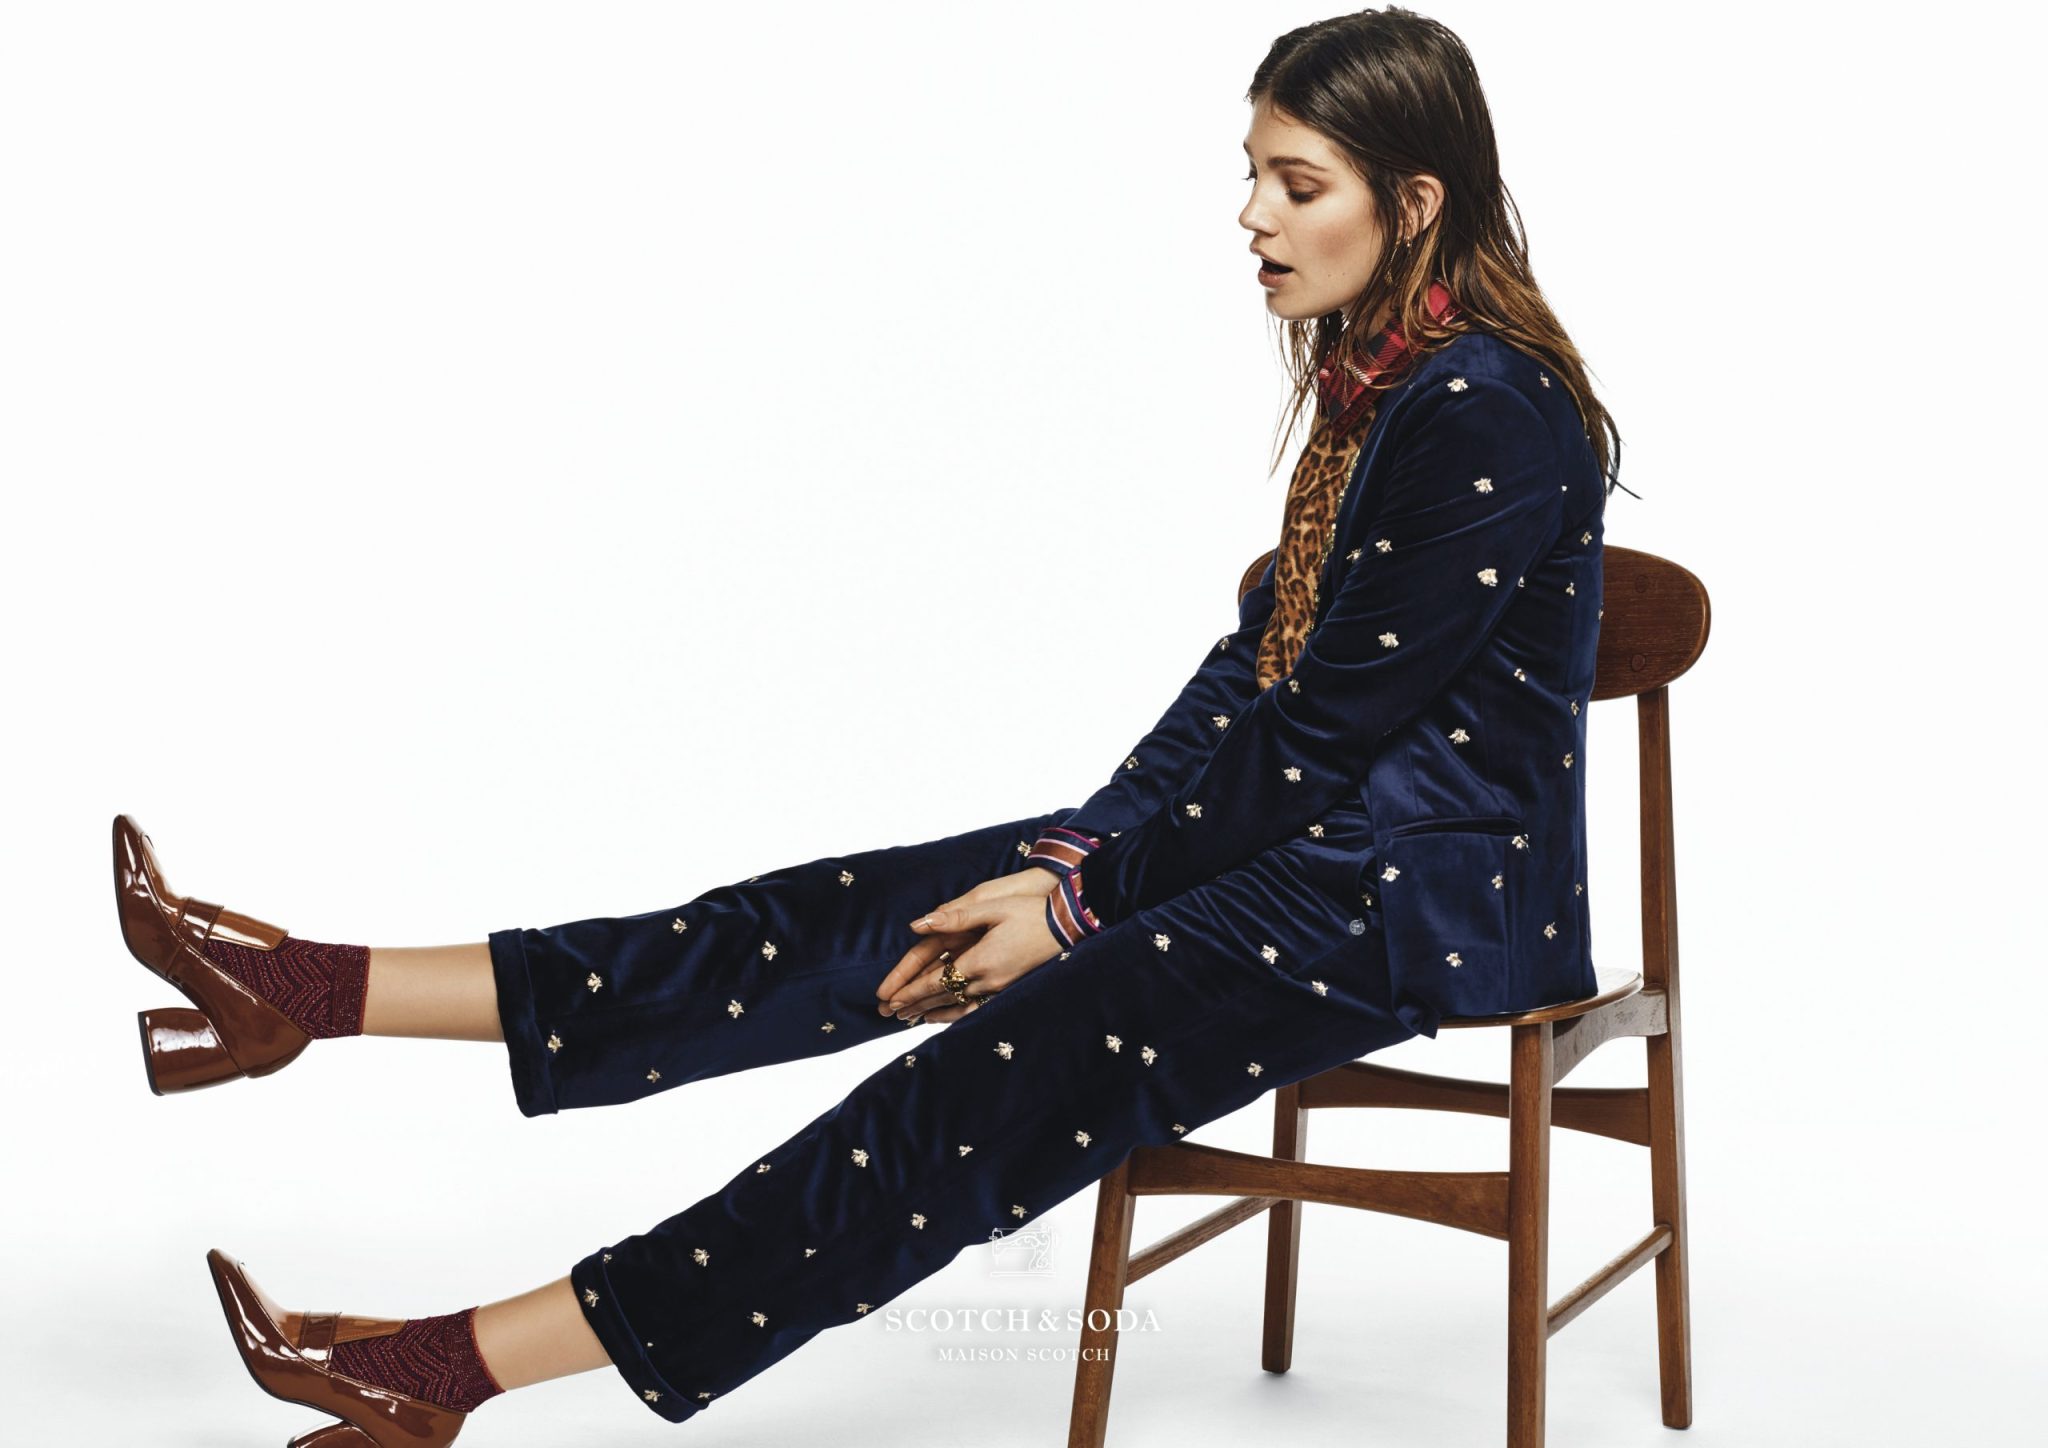 Nautical prints find their way in Scotch & Soda's winter collection